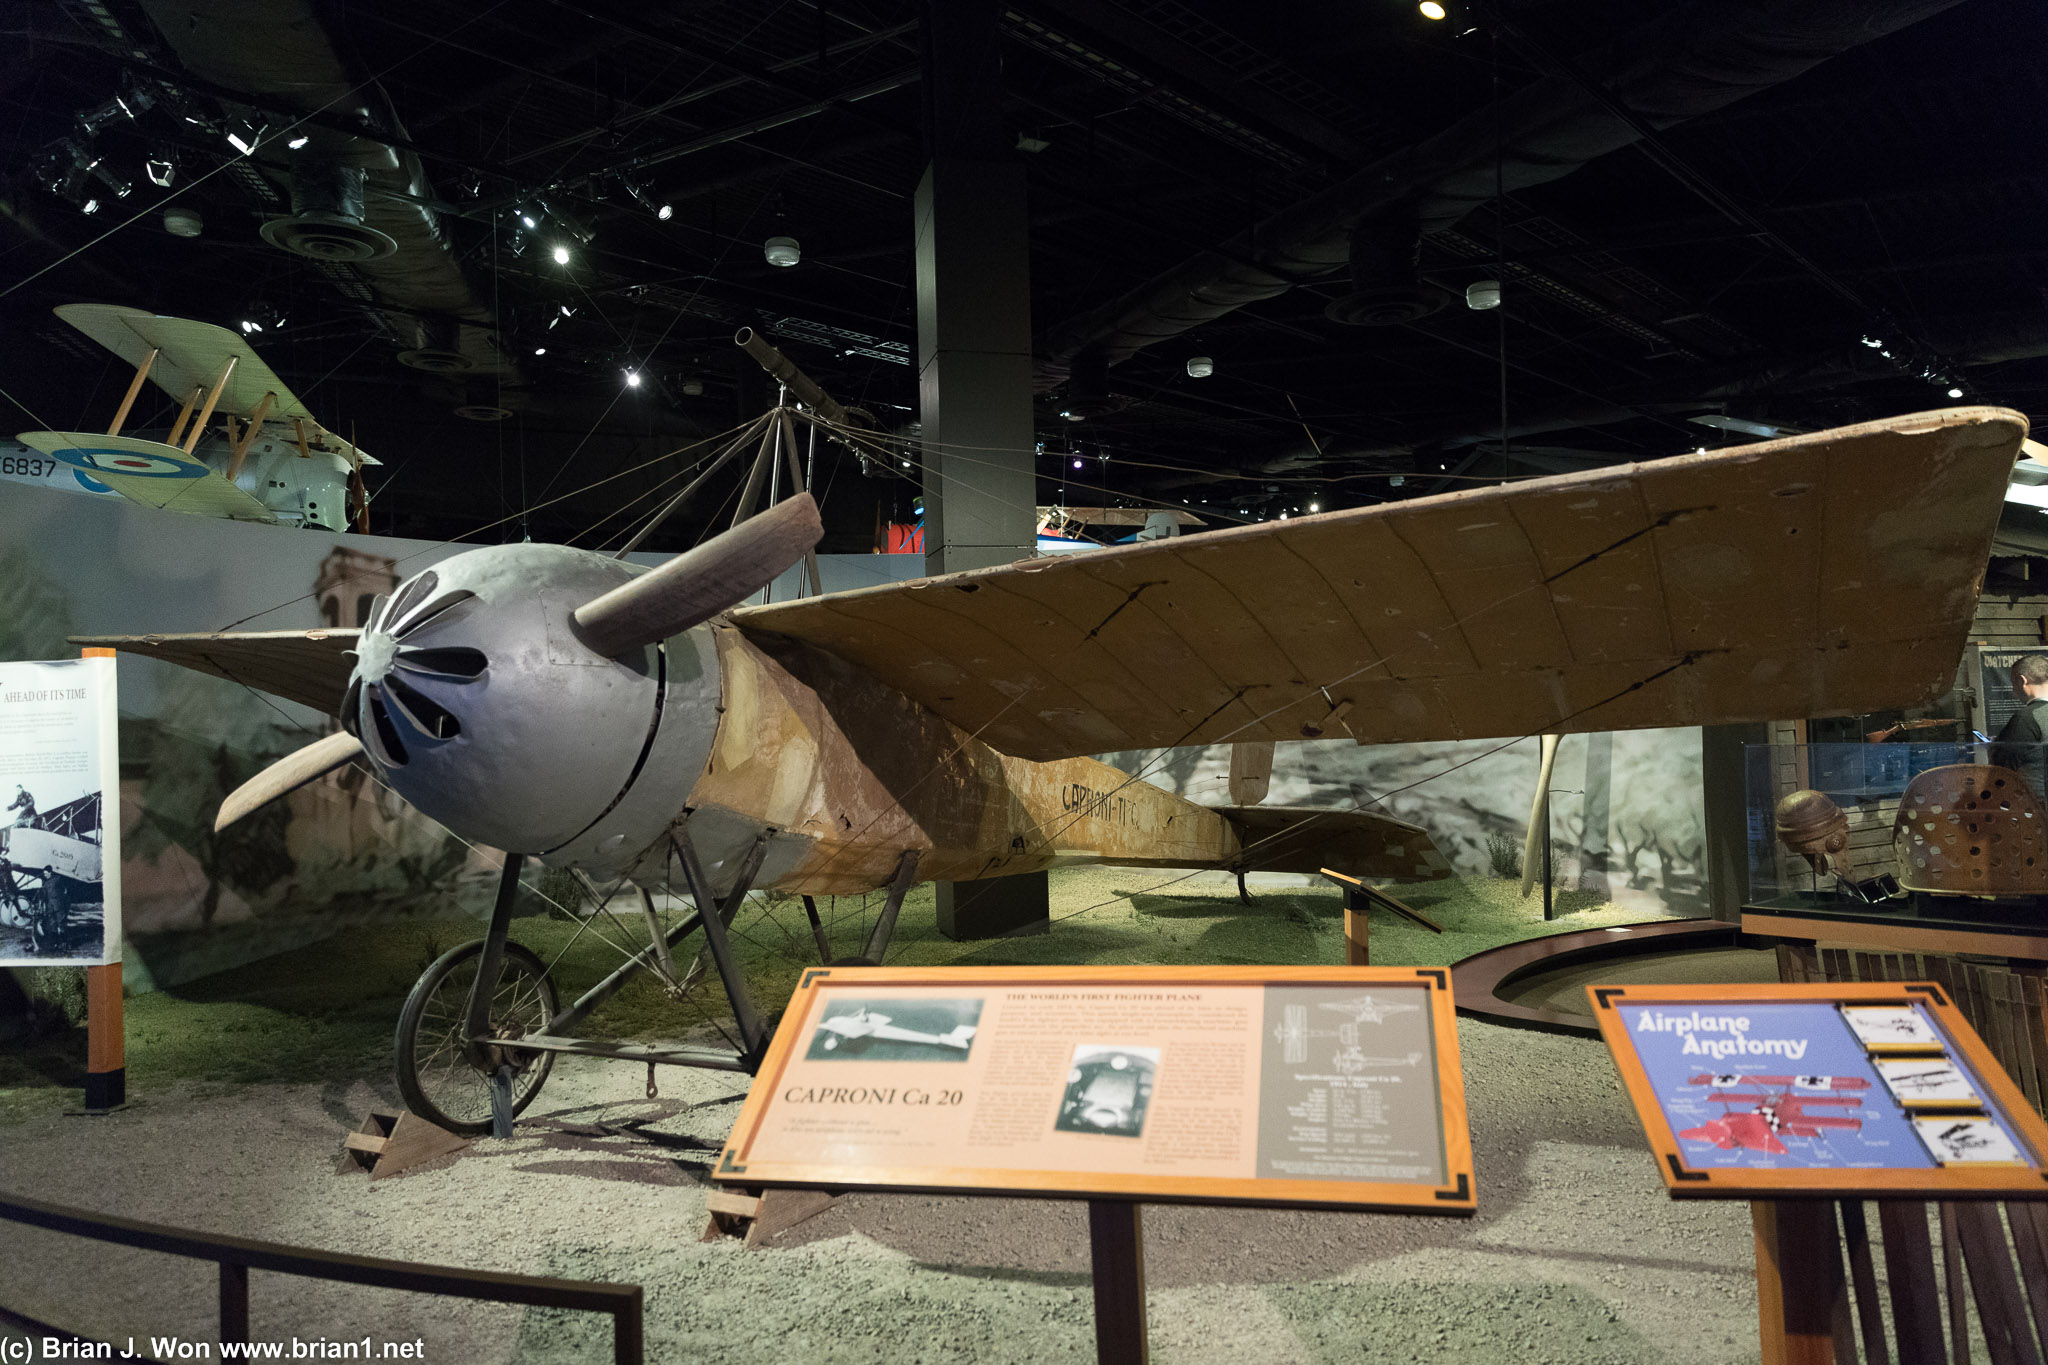 Caproni Ca 20, the world's first fighter plane.